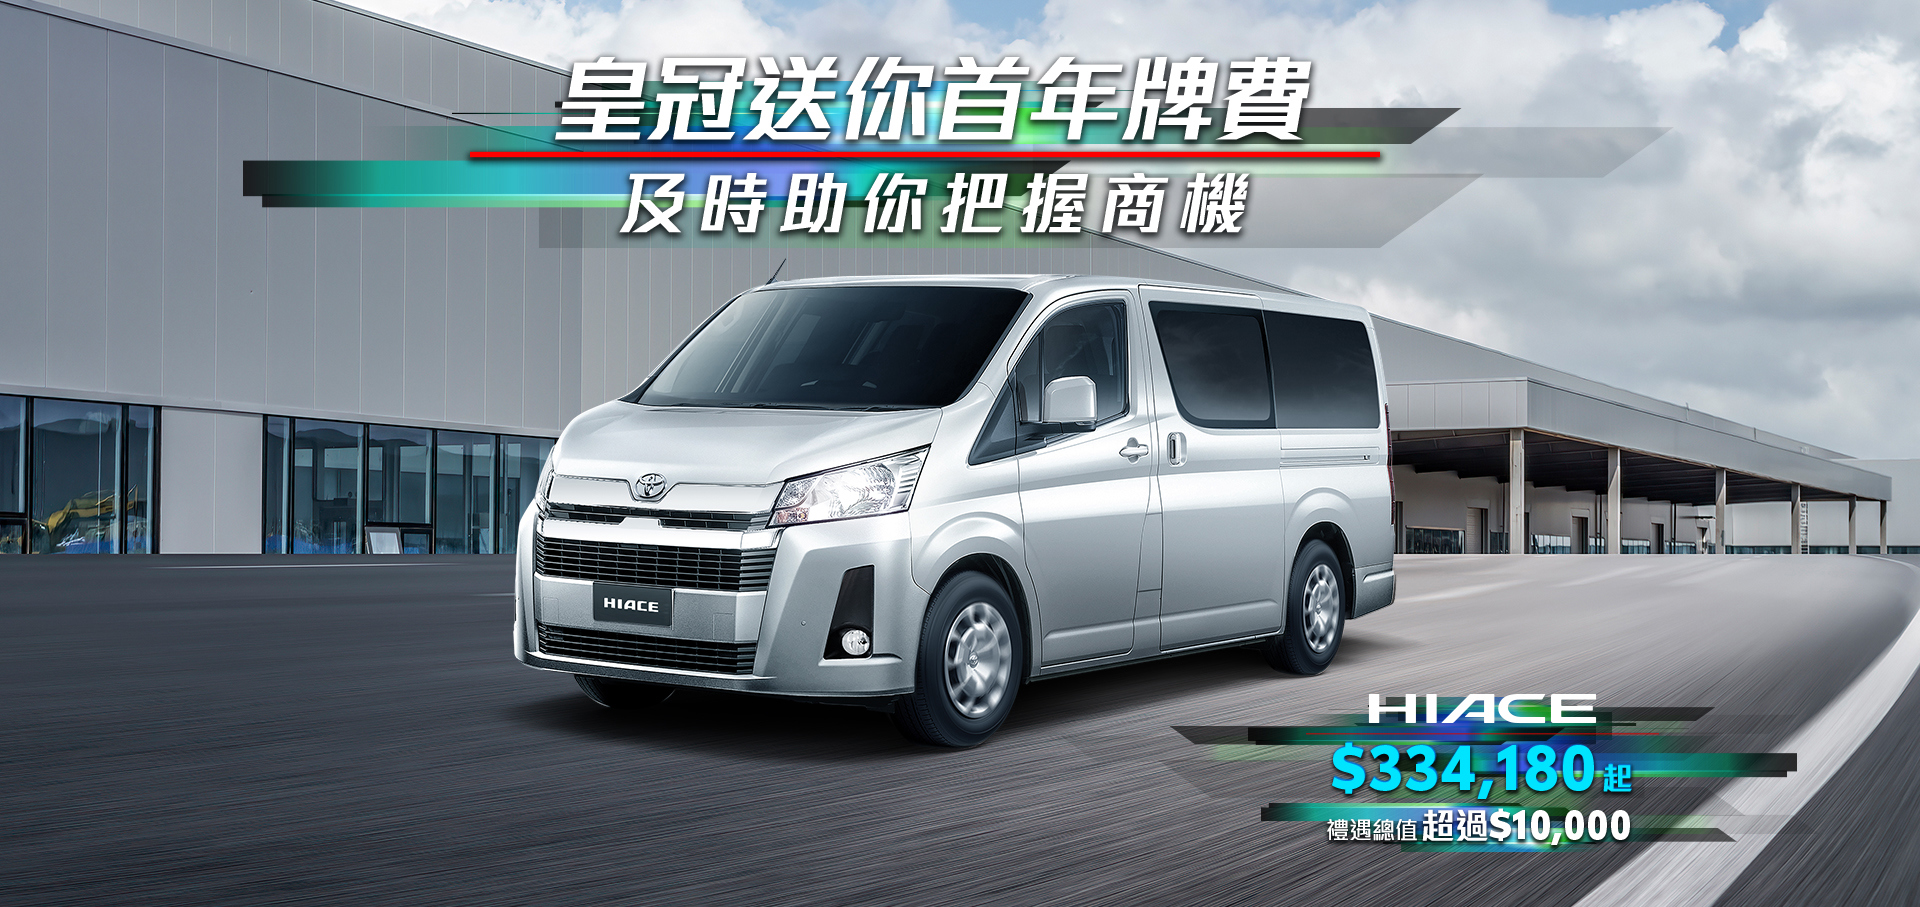 HIACE｜Crown Motors Offers the First-Year Licence Fee Empower Your Business